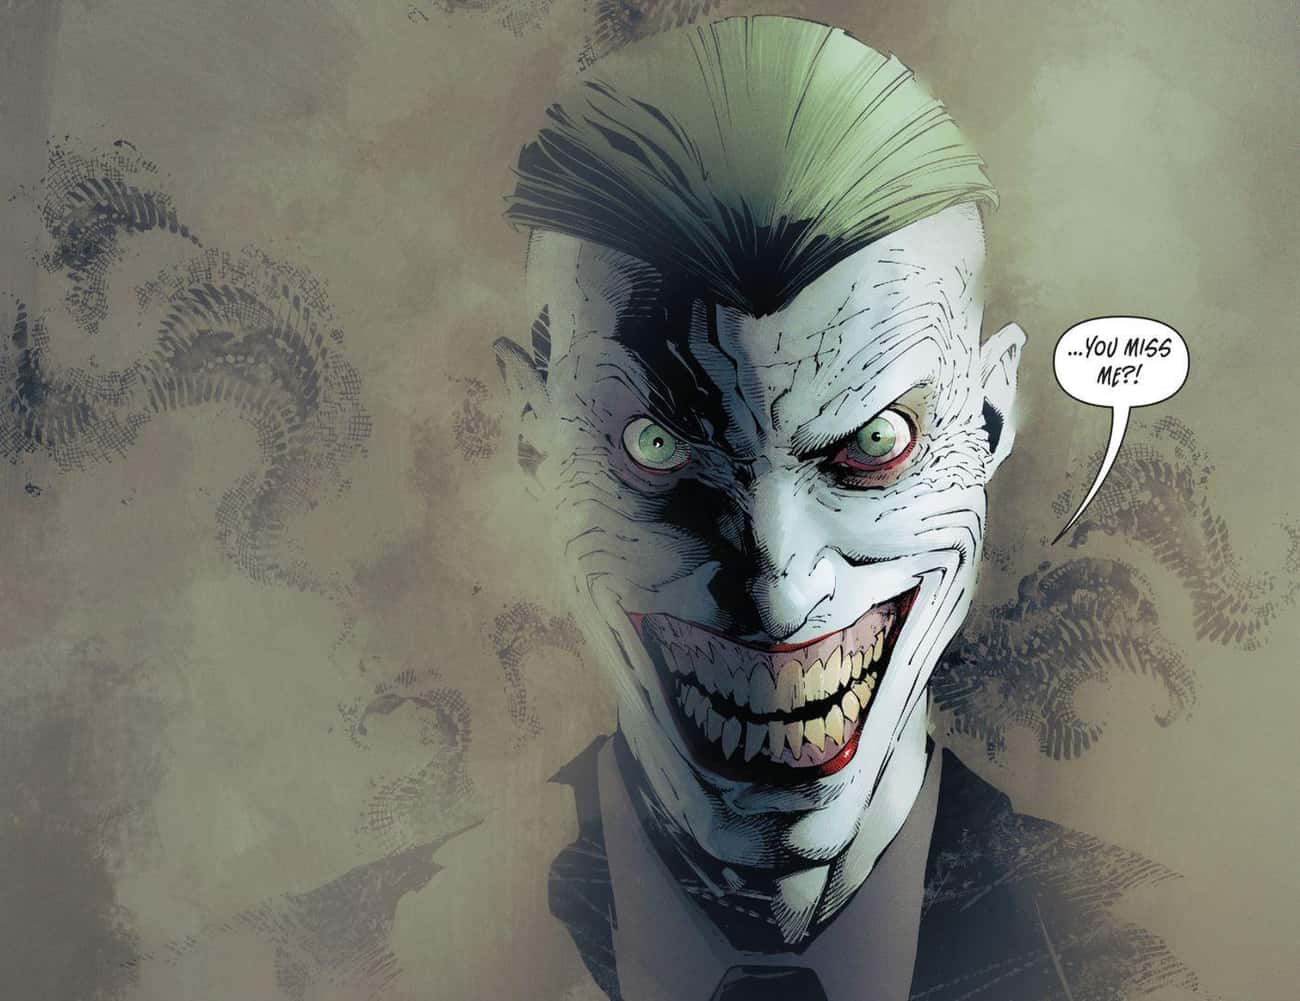 The Joker Would Sow A Level Of Chaos The Avengers Have Never Had To Deal With